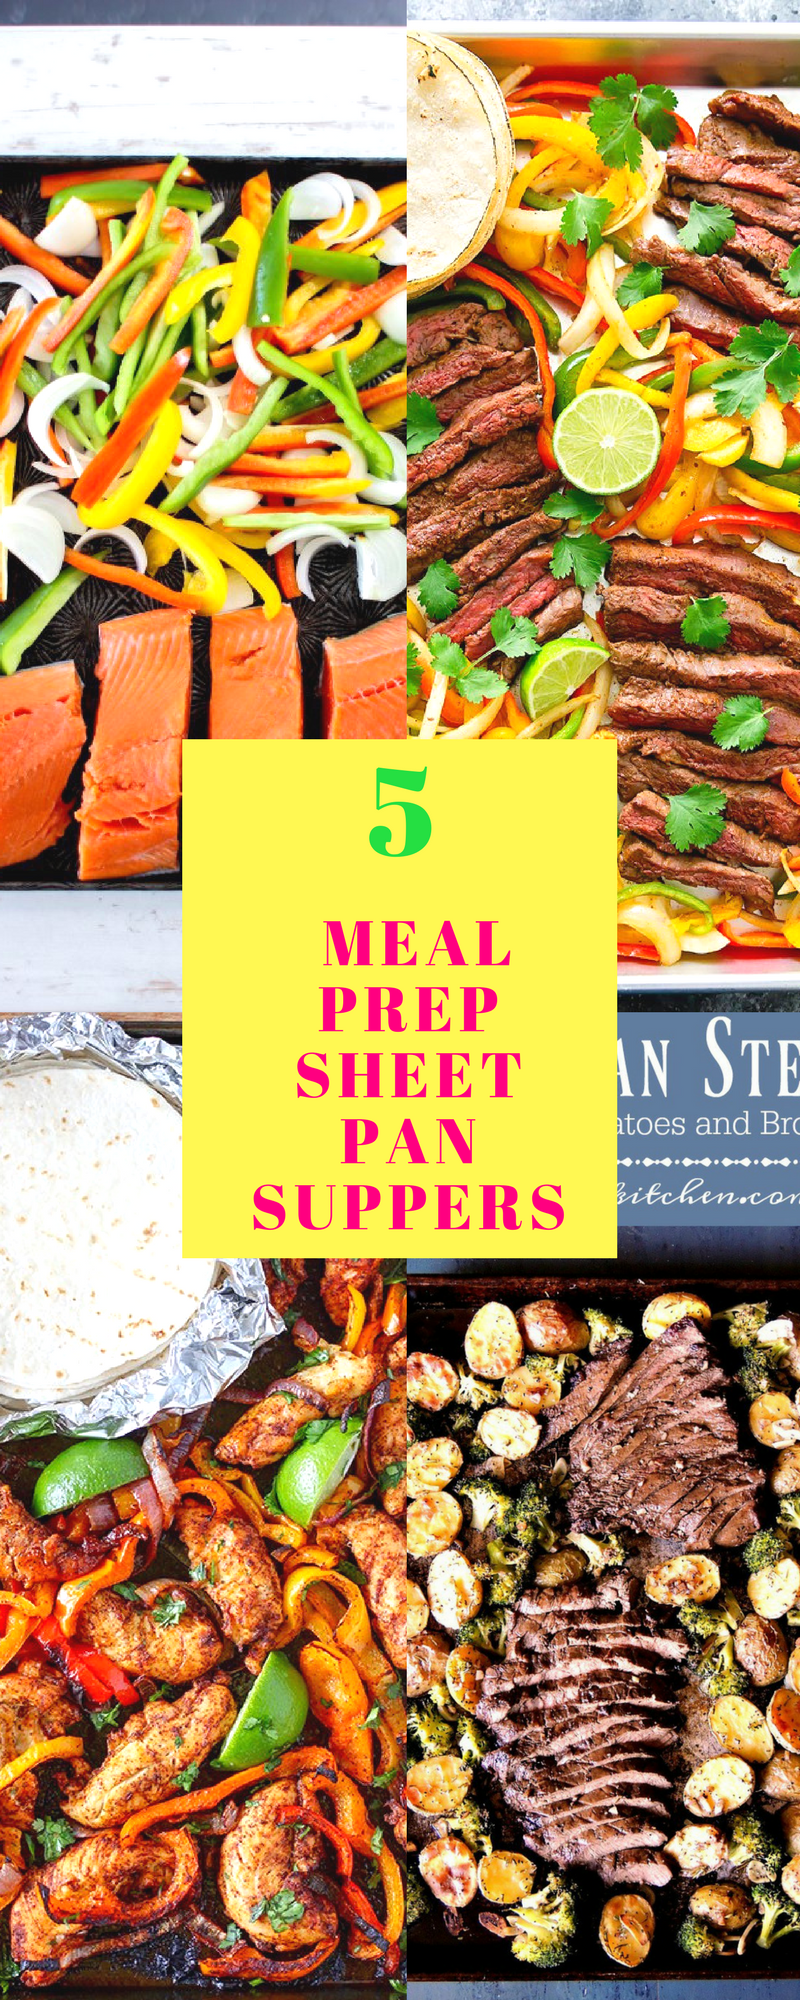 Meal prep on a sheet pan for your weight loss goals. Eating healthy is all in the planning. Lose weight by planning your meals ahead of time.